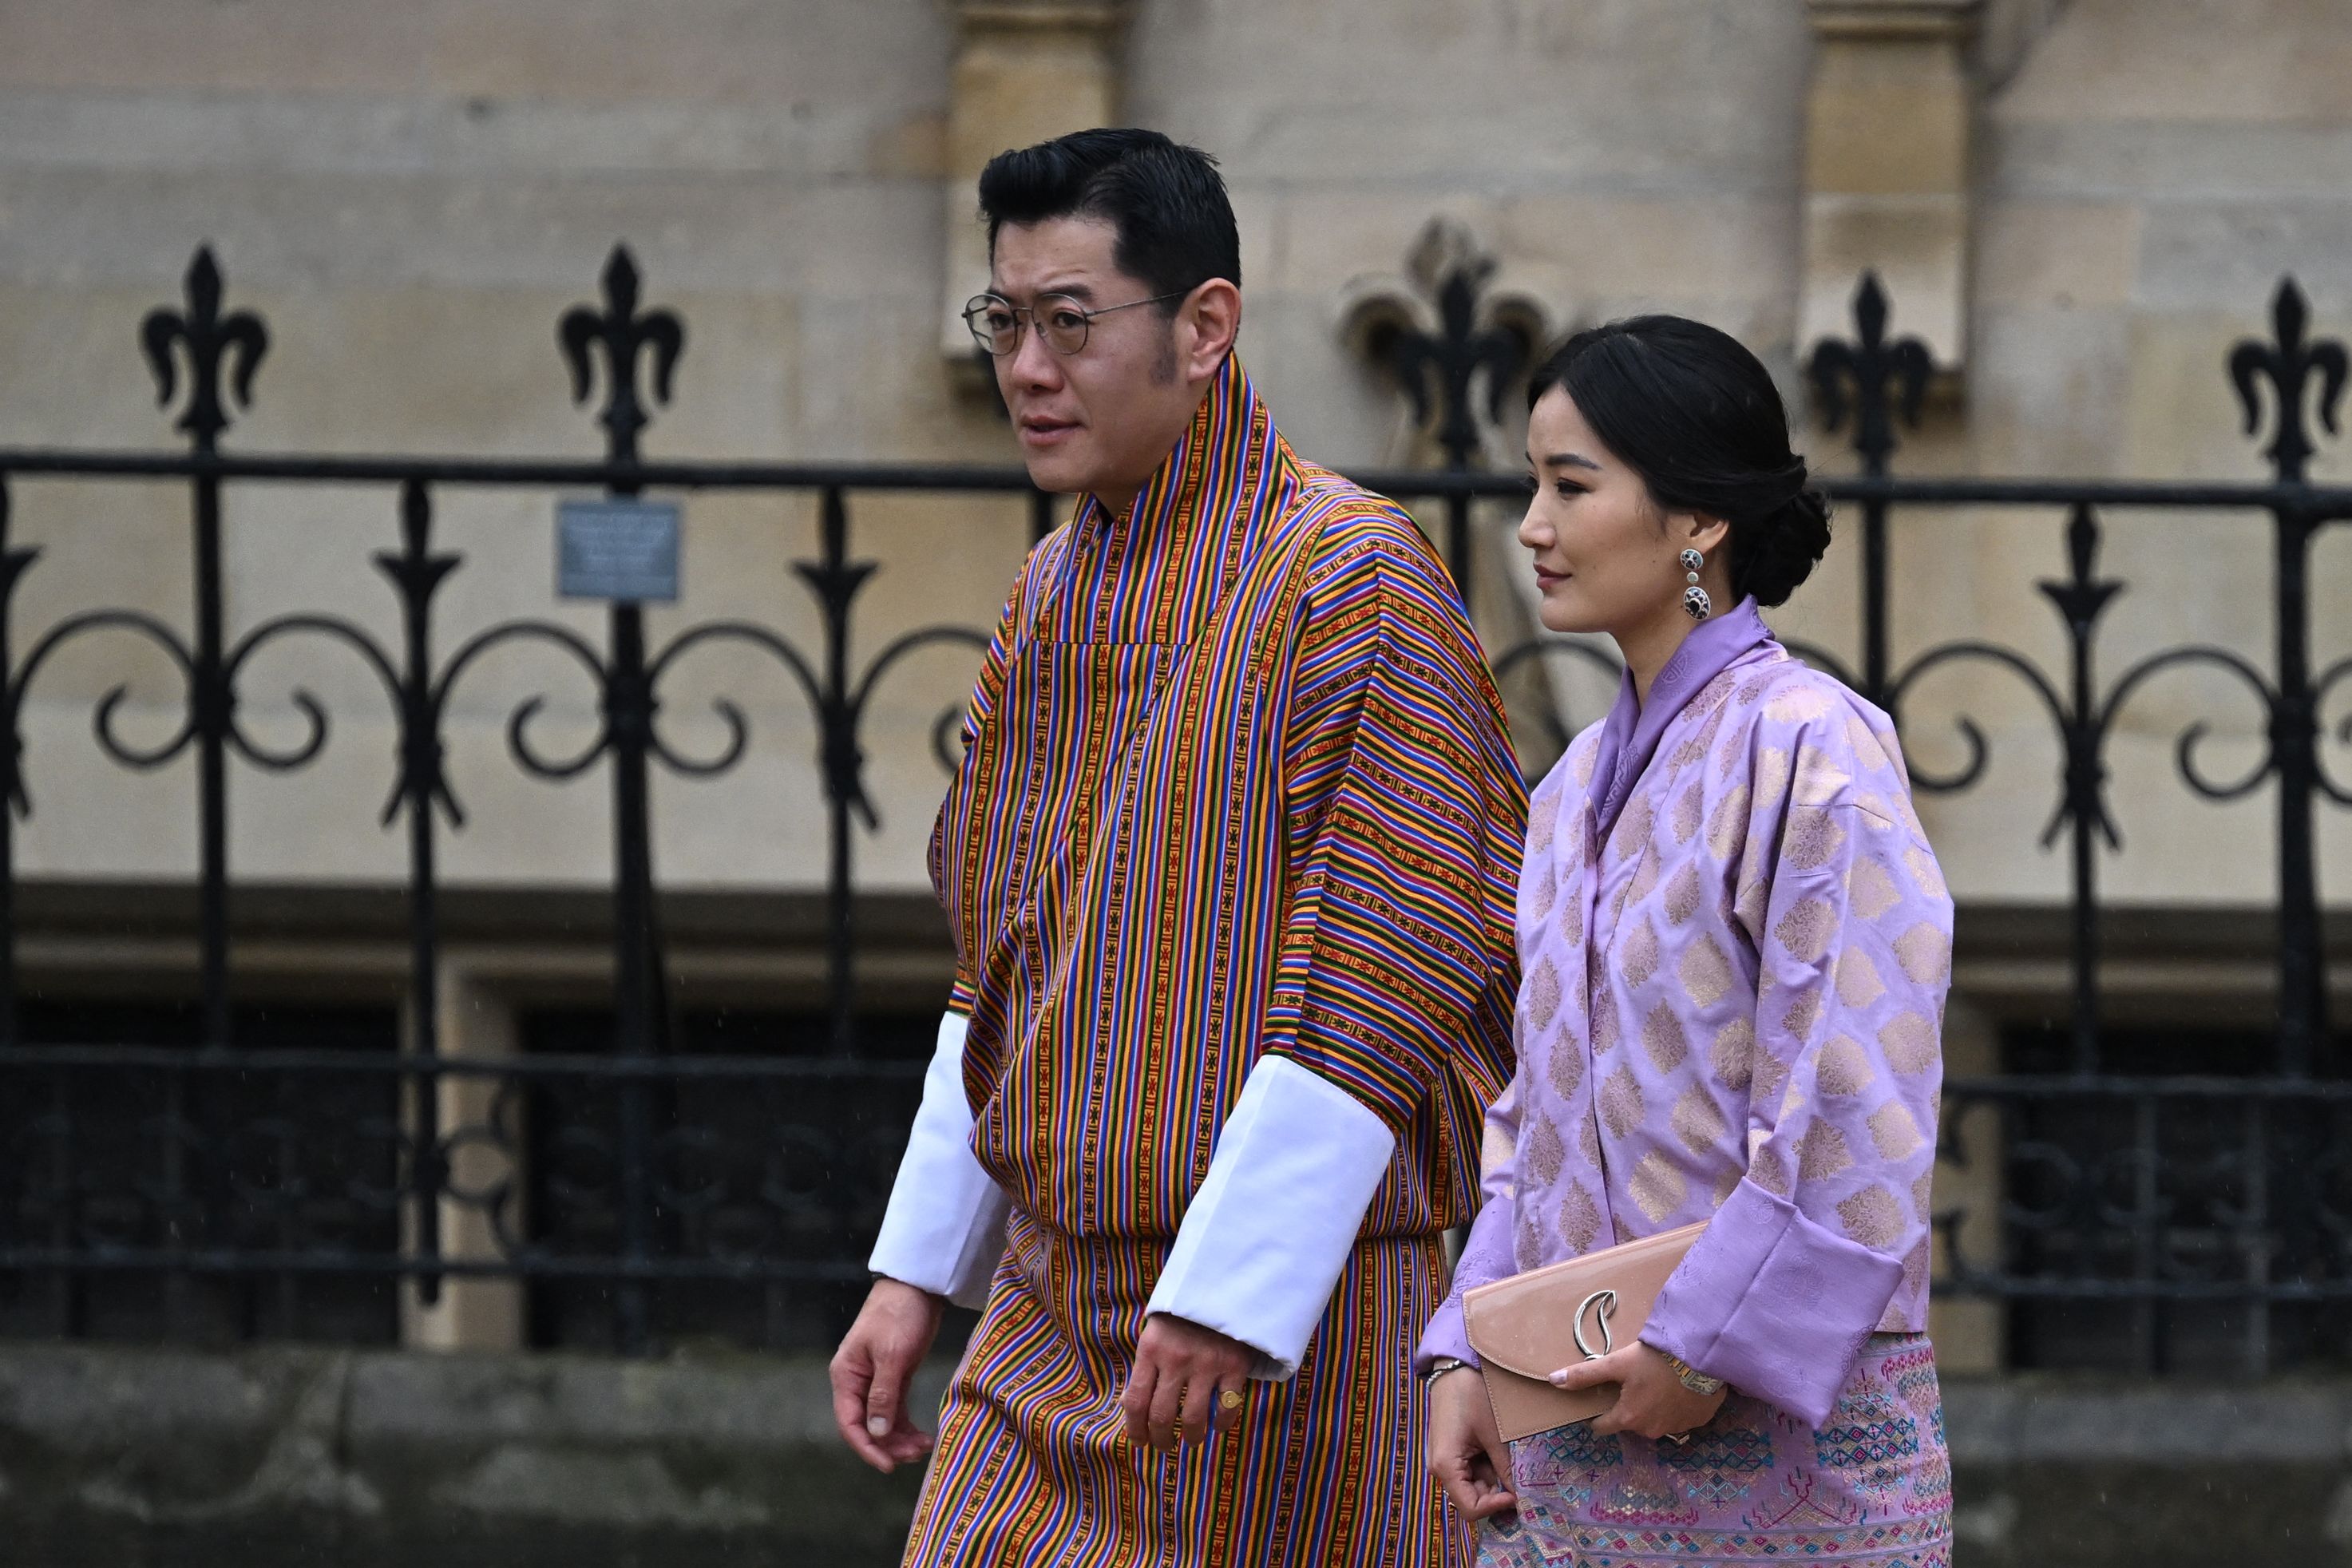 The King of Bhutan also attended the ceremony with his wife